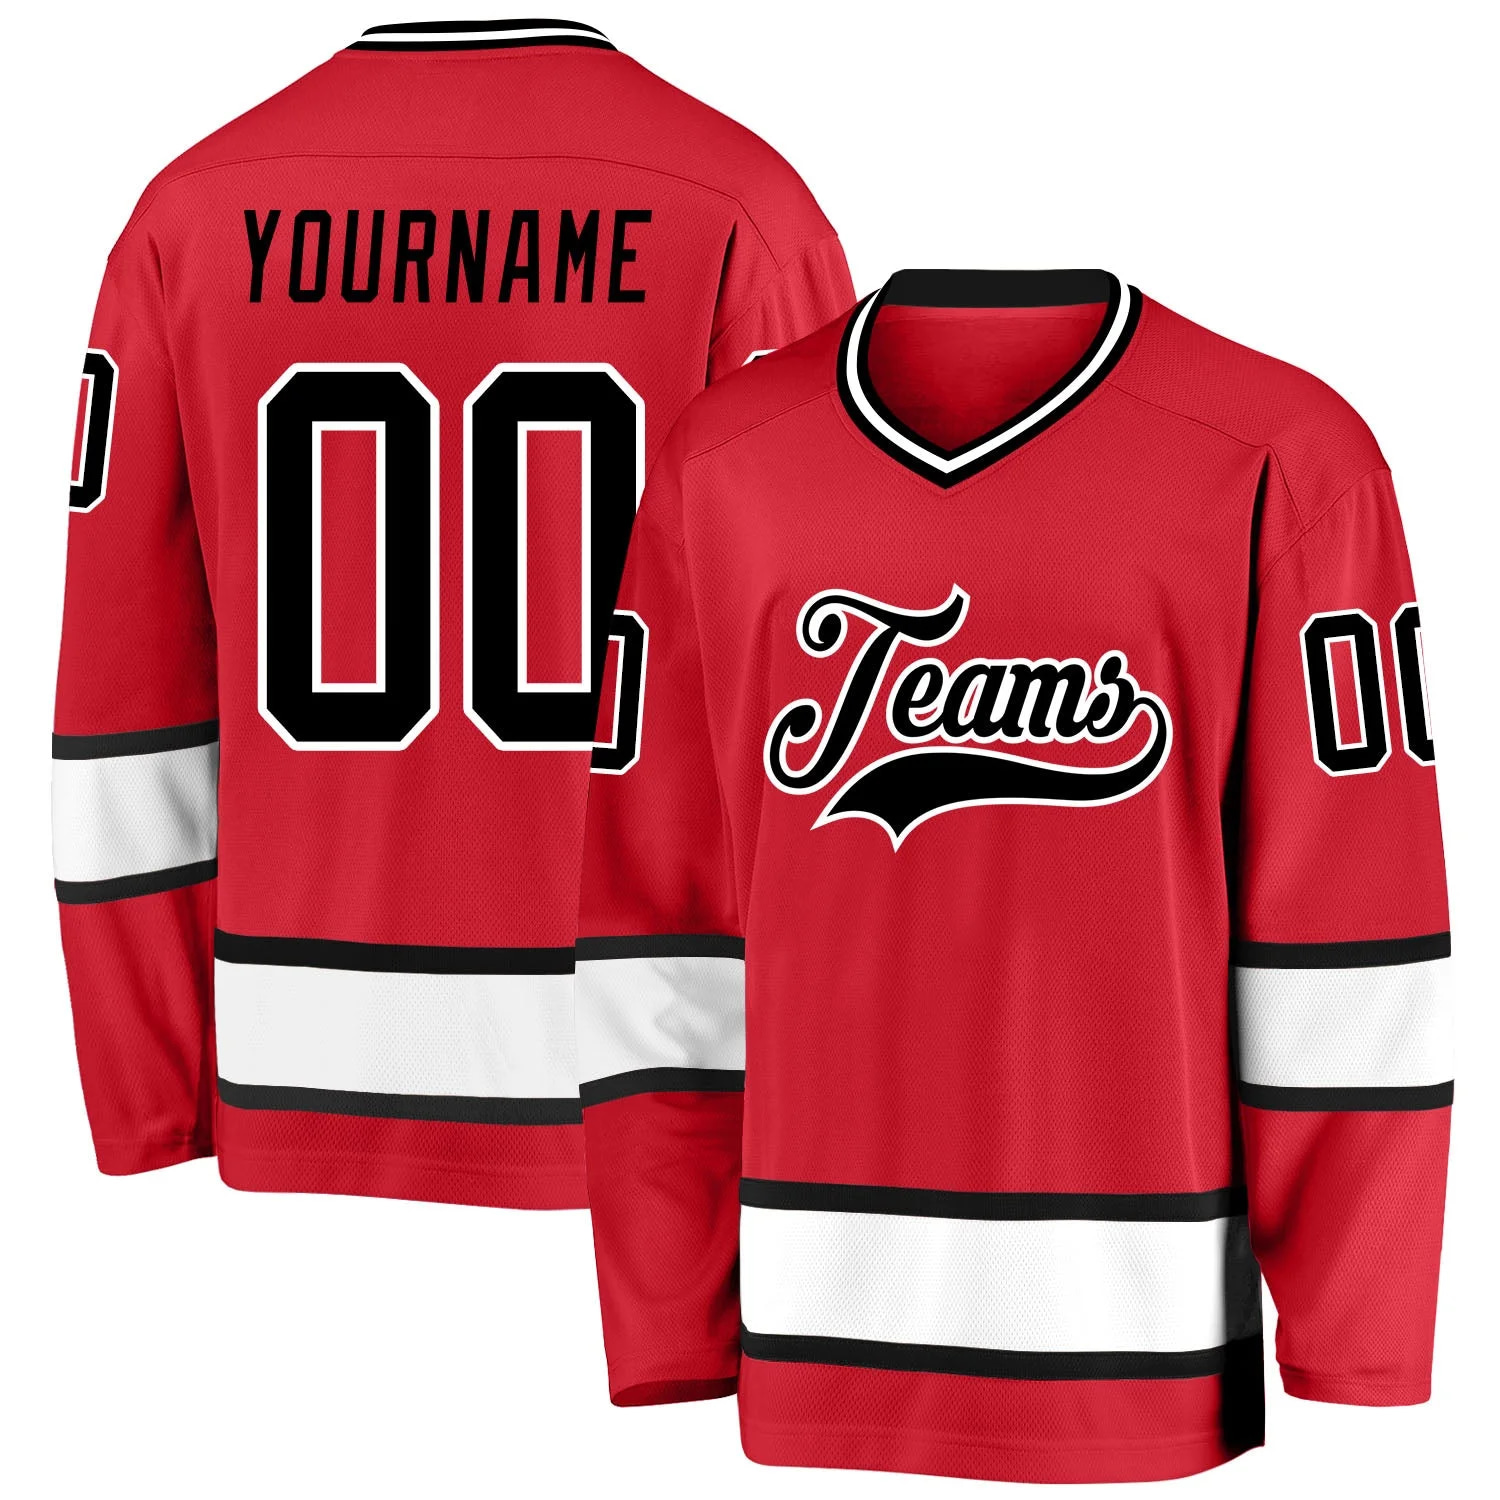 Stitched And Print Red Black-white Hockey Jersey Custom